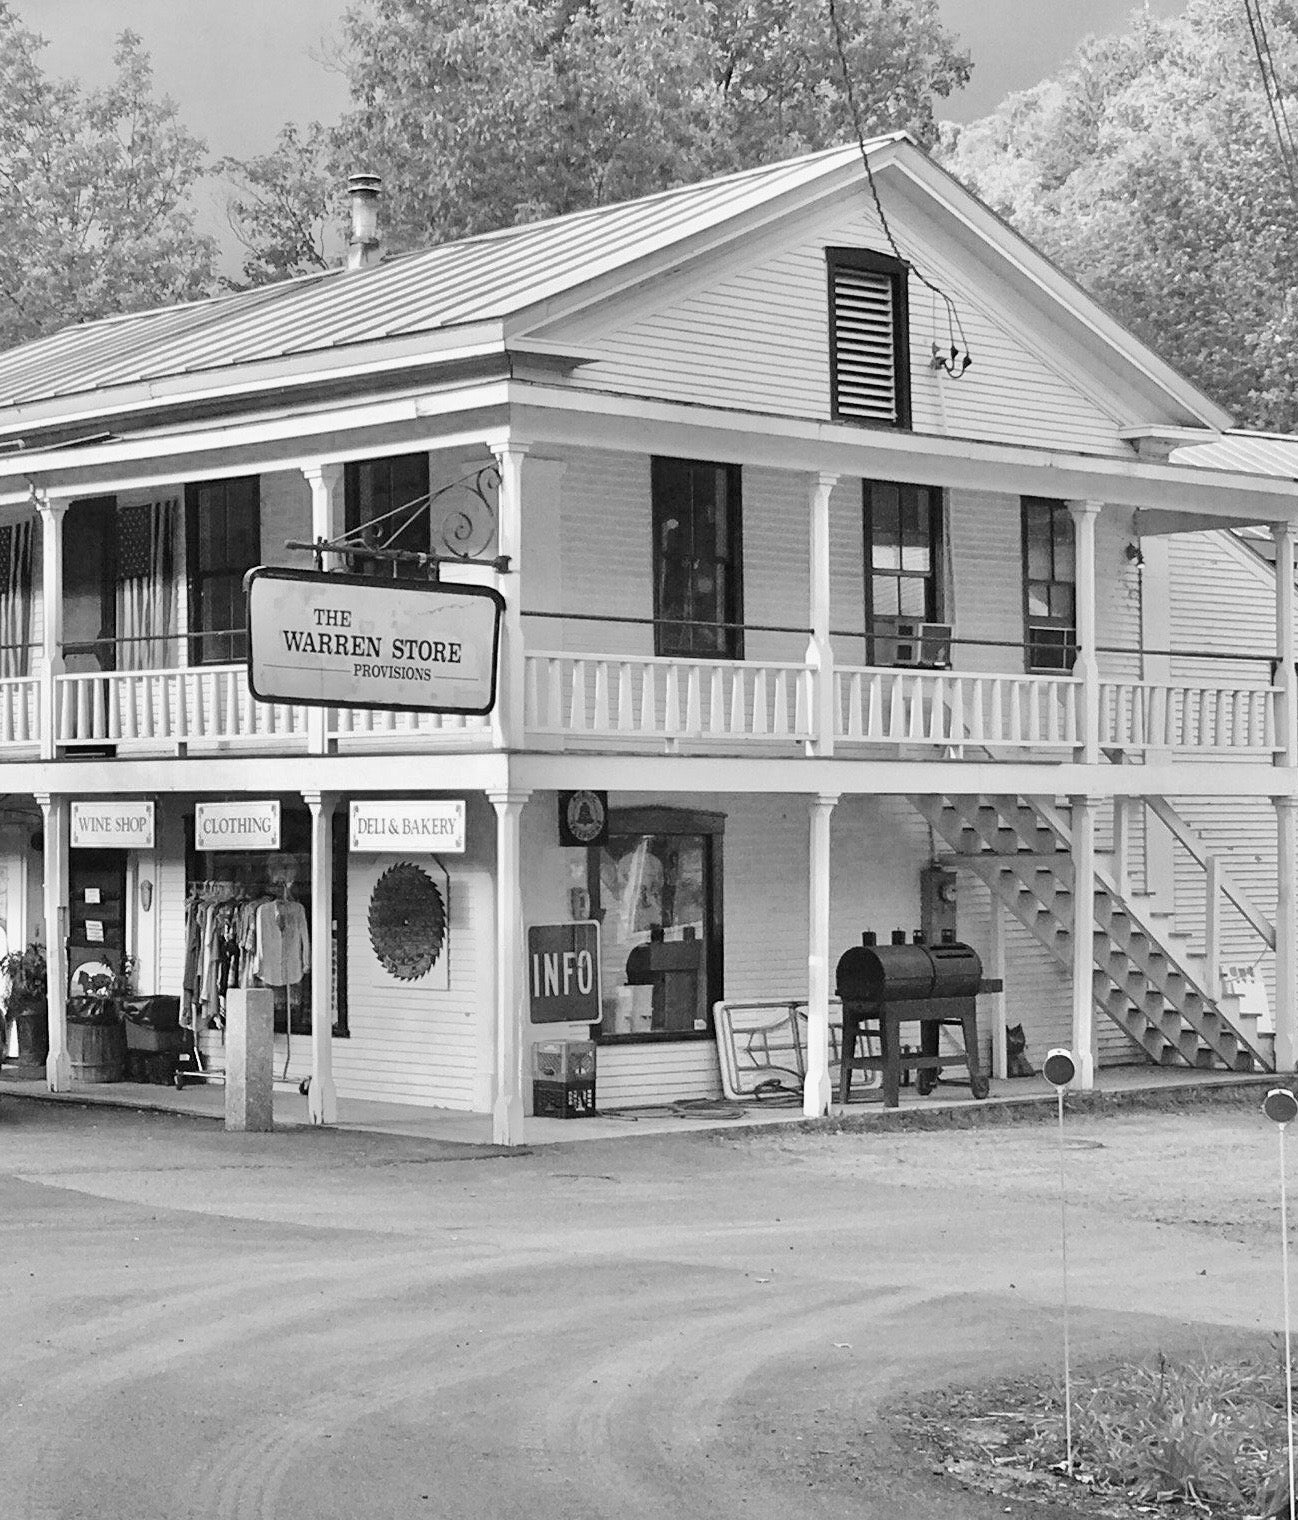 The Country Store: Let's bring it back